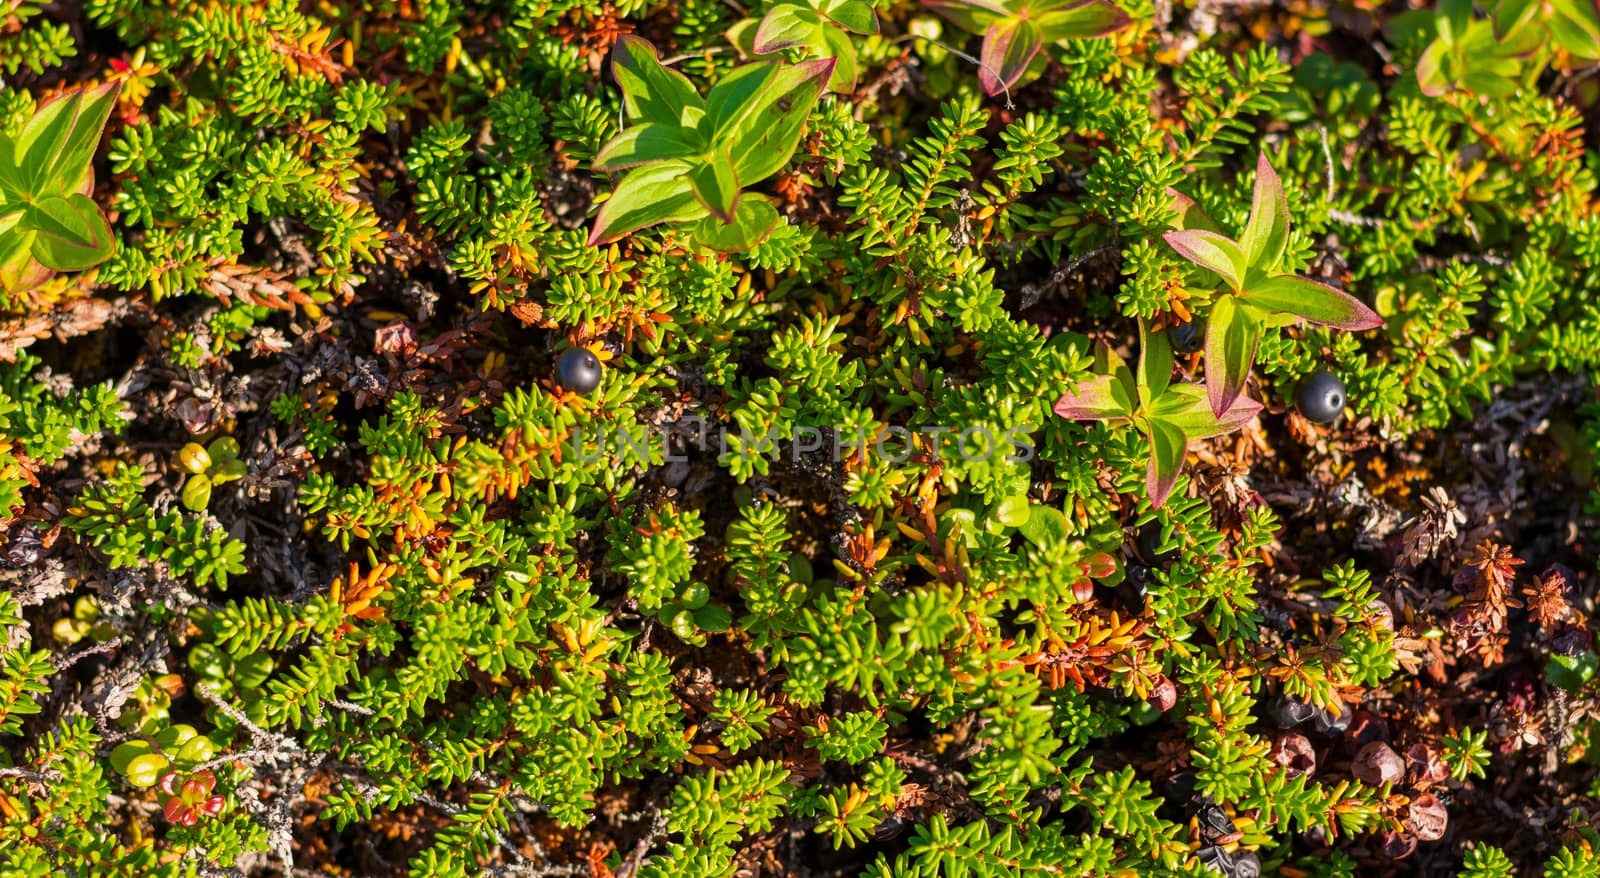 Background of crowberry thickets in coniferous leaves berries. Small black berries in leaves resembling needles. Medicinal plant of Murmansk region. Black crow berries help with fatigue